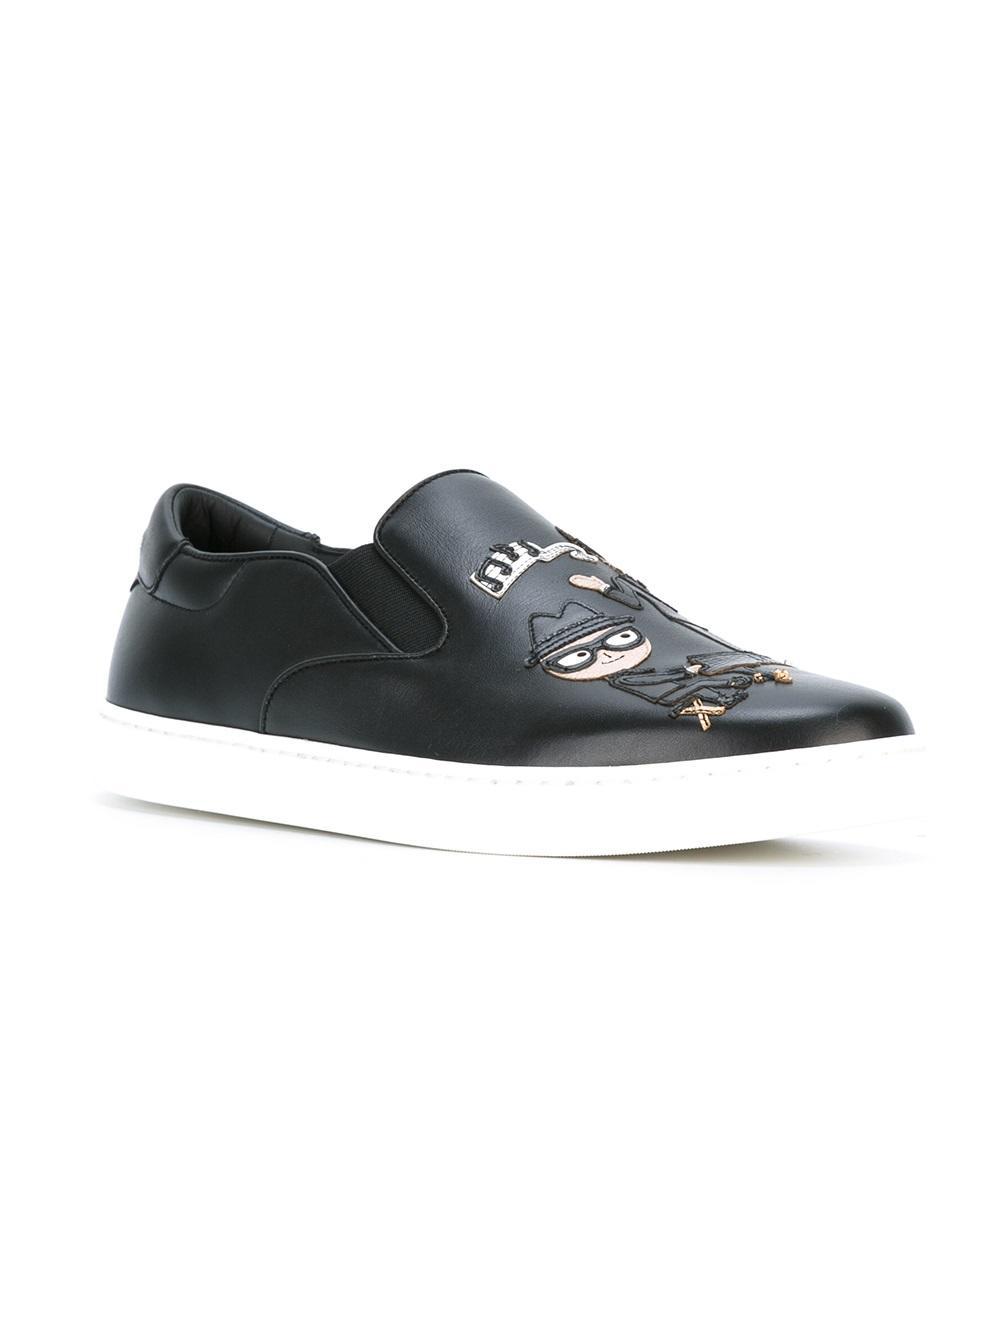 Dolce & Gabbana London Designers Patch Slip-on Sneakers in Black for ...